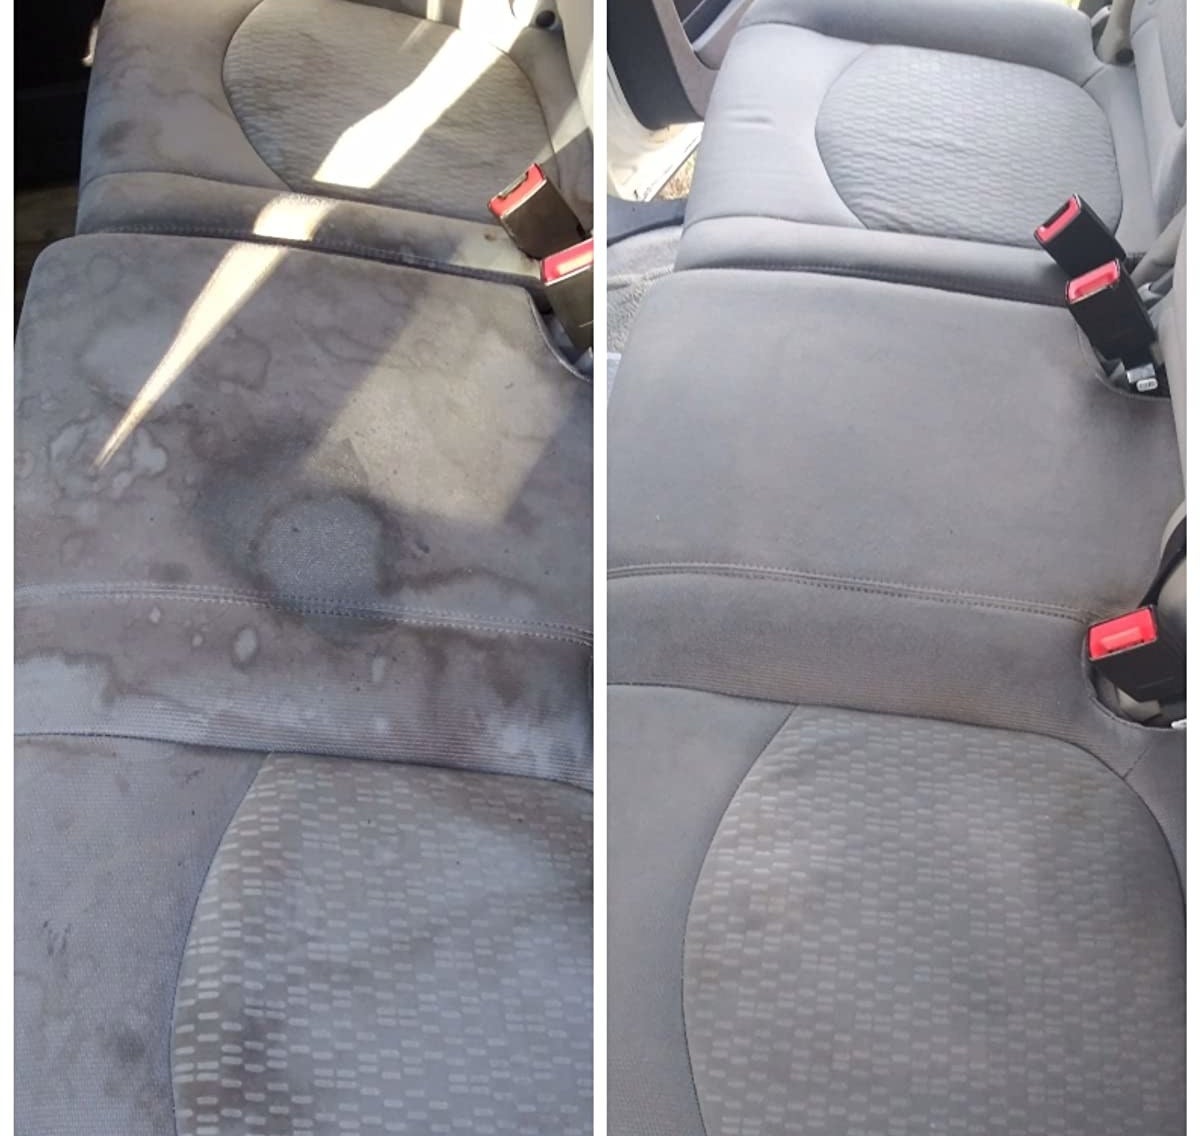 reviewer photo showing their car seat badly stained and then looking almost completely new after using the stain removing spray 